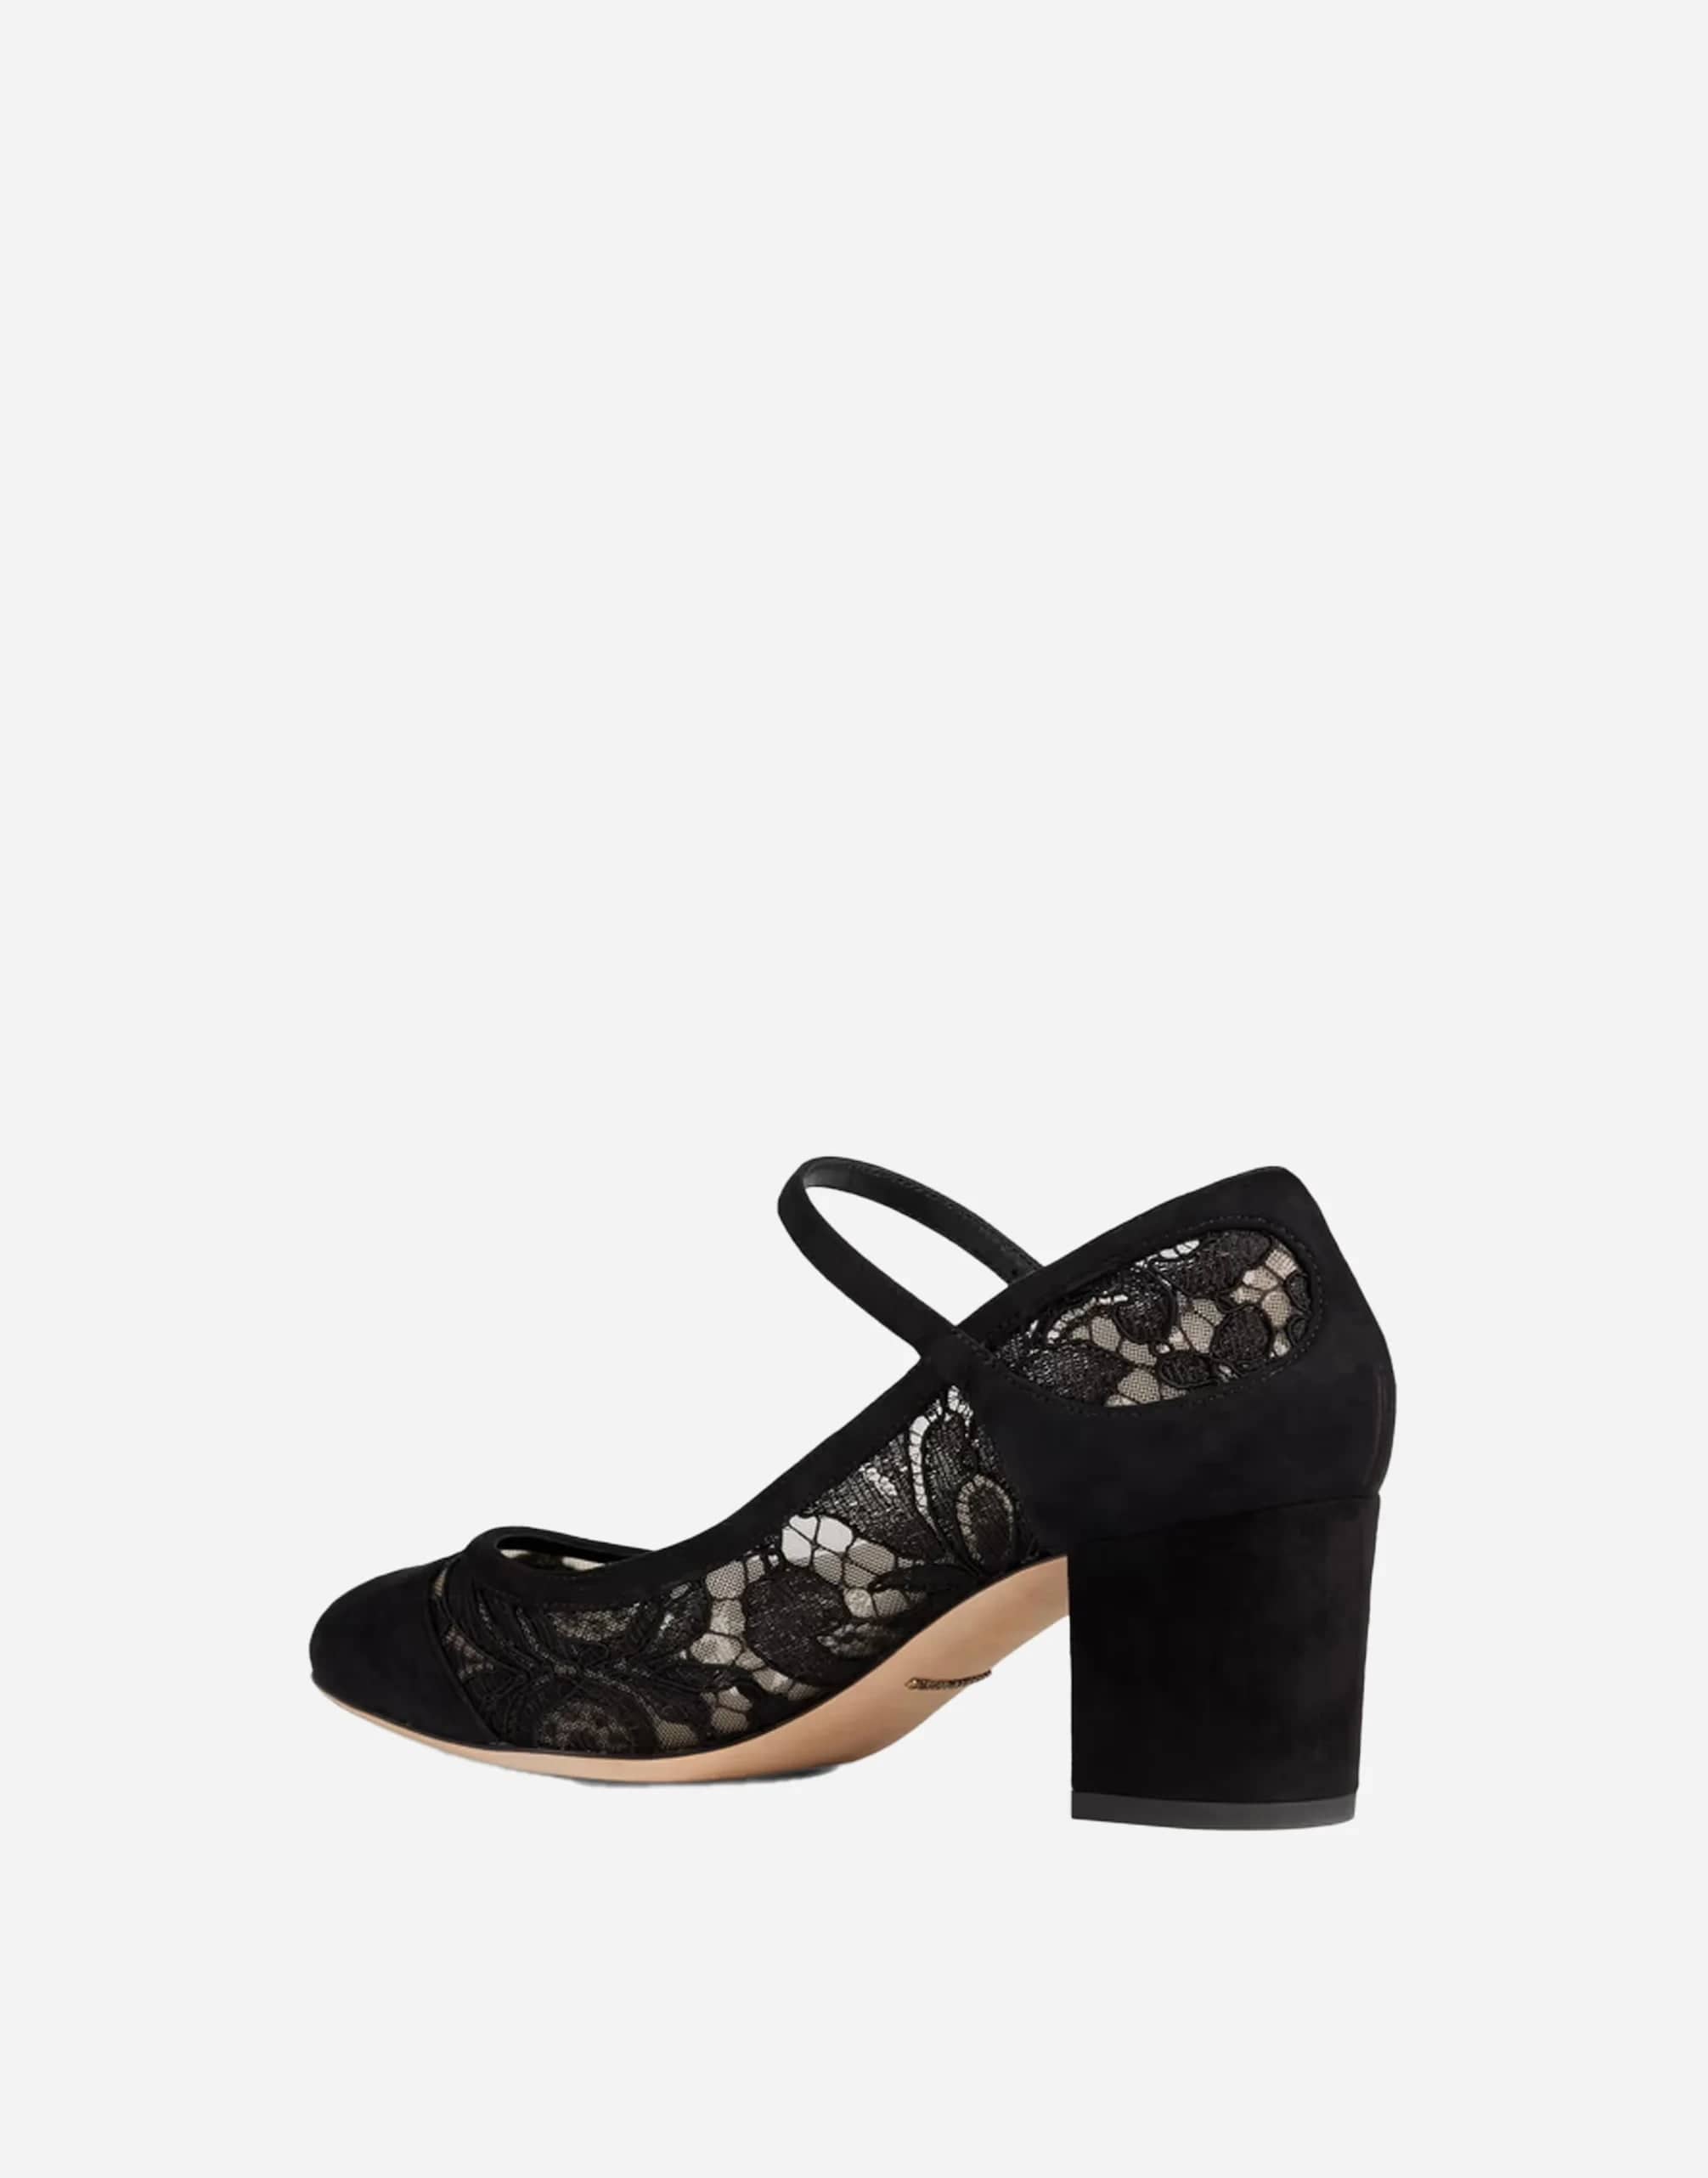 Dolce & Gabbana Corded Lace Mary Jane Pumps